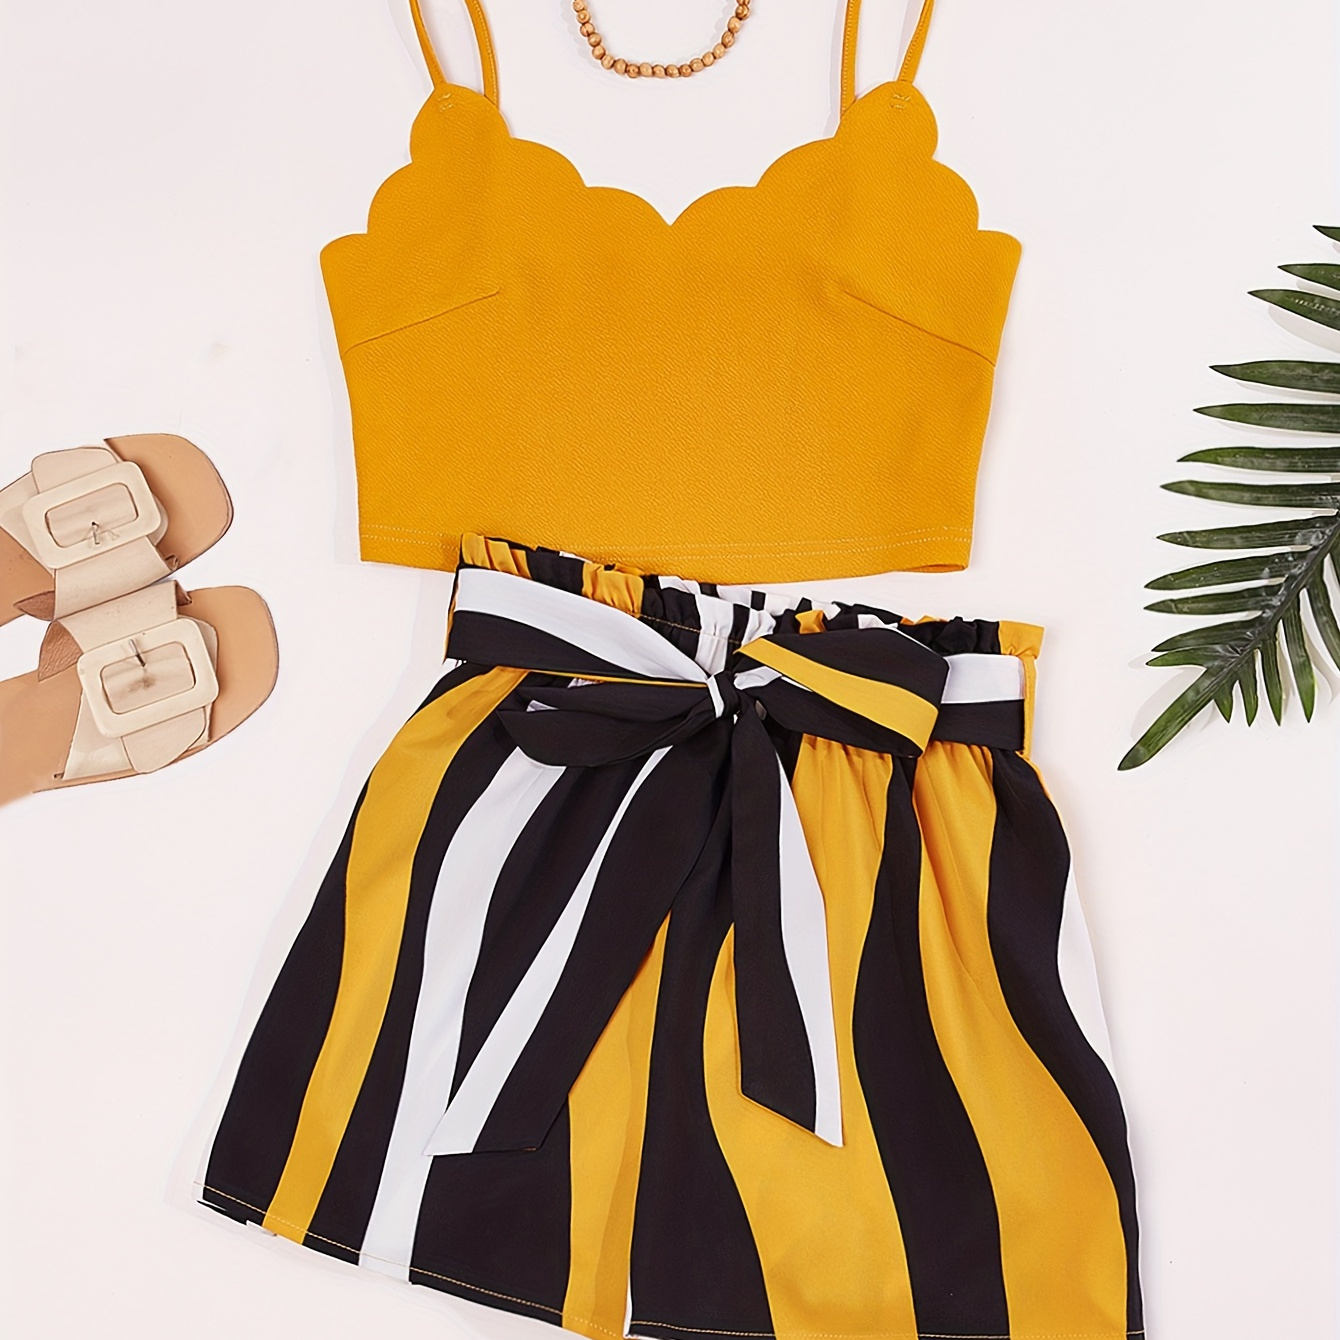 

Striped Print Casual Shorts Suits, Scallop Trim Backless Spaghetti Strap Crop Cami Top & Tie Elastic Waist Shorts Outfits, Women's Clothing